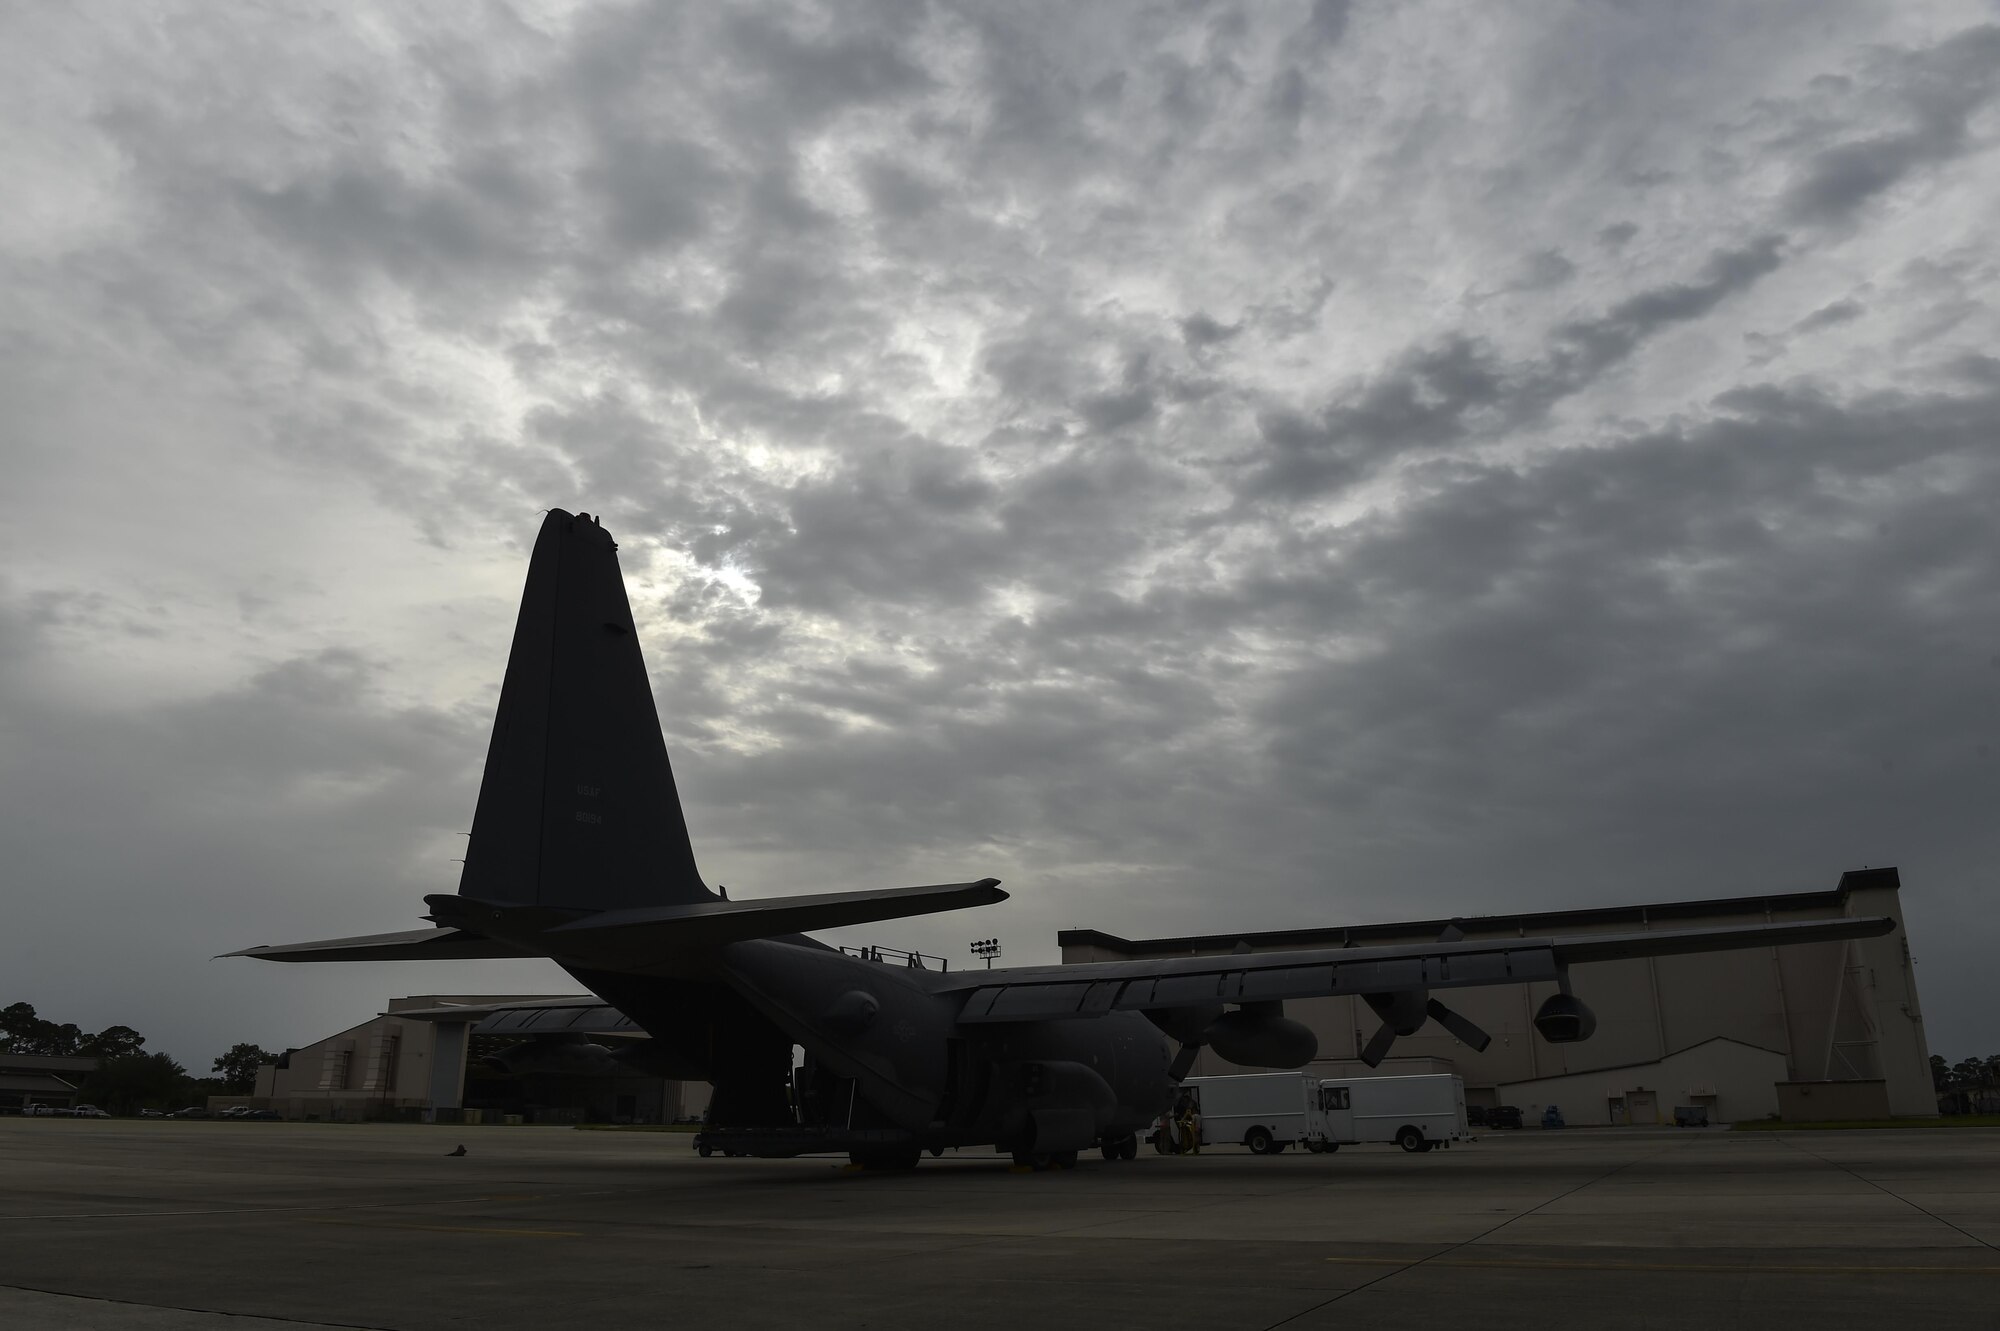 Loadmasters with the 15th Special Operations Squadron secure cargo pallets on an MC-130H Combat Talon II at Hurlburt Field, Fla., May 30, 2017. The Combat Talon II provides infiltration, exfiltration, and resupply of special operations forces and equipment in hostile or denied territory anytime, anyplace. (U.S. Air Force photo by Airman 1st Class Joseph Pick)